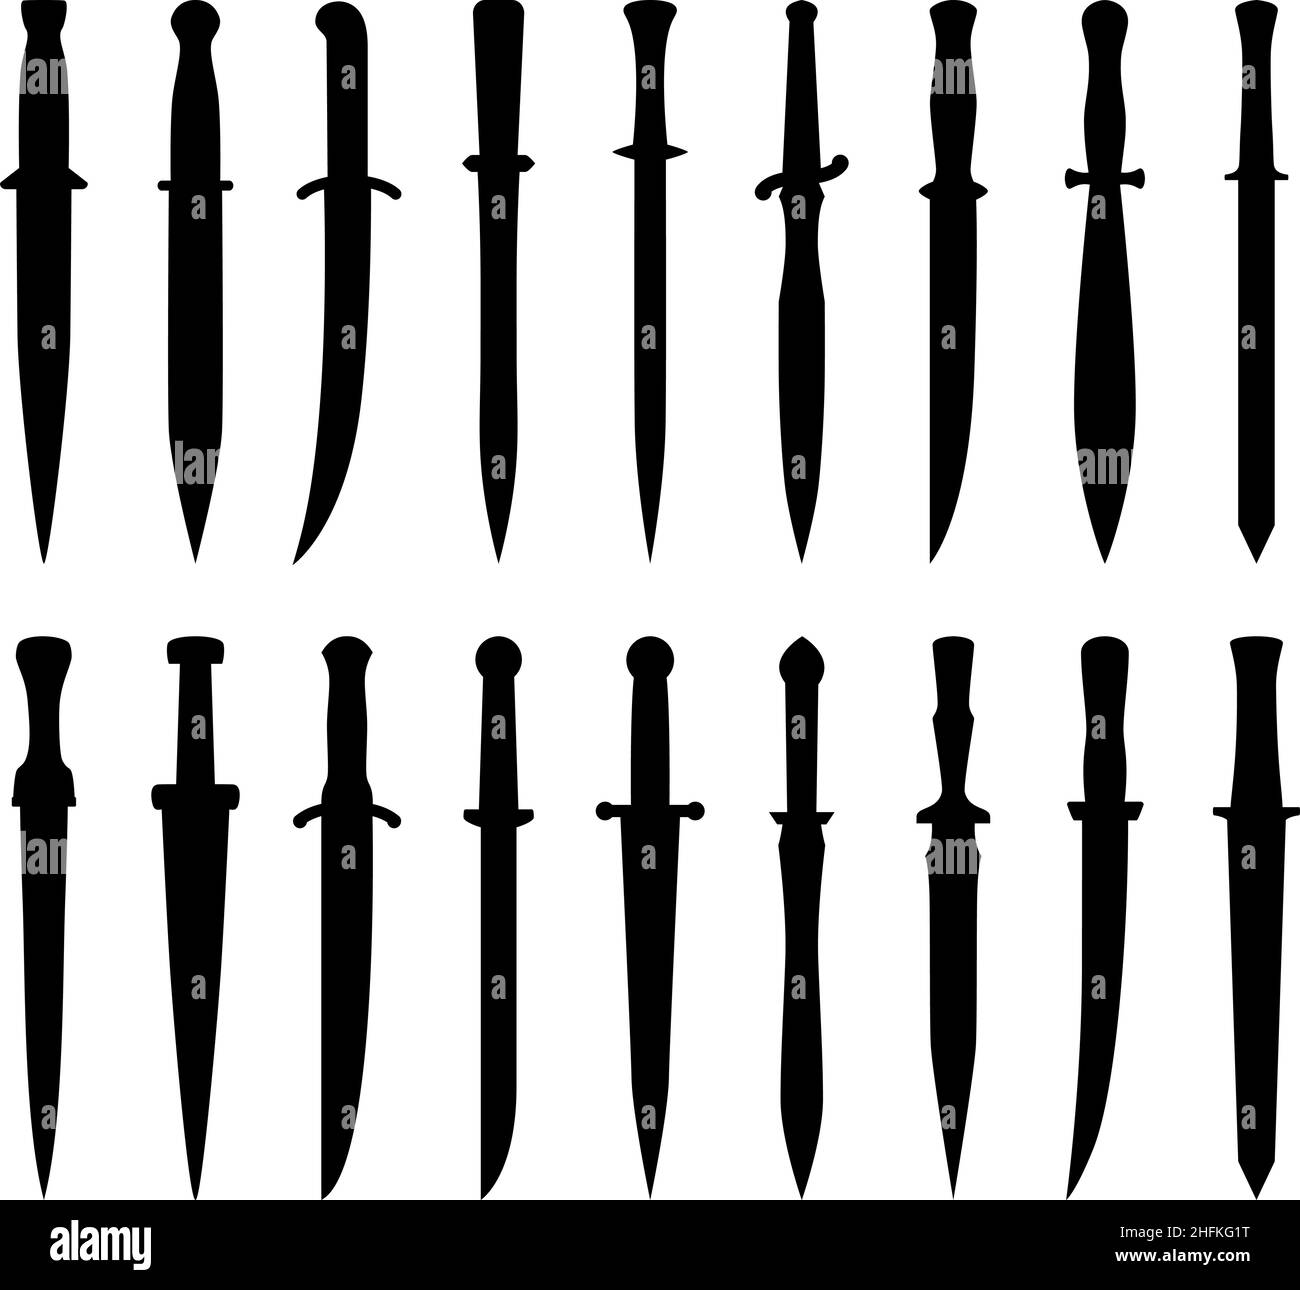 Set of silhouettes of daggers and swords, vector illustration Stock Vector